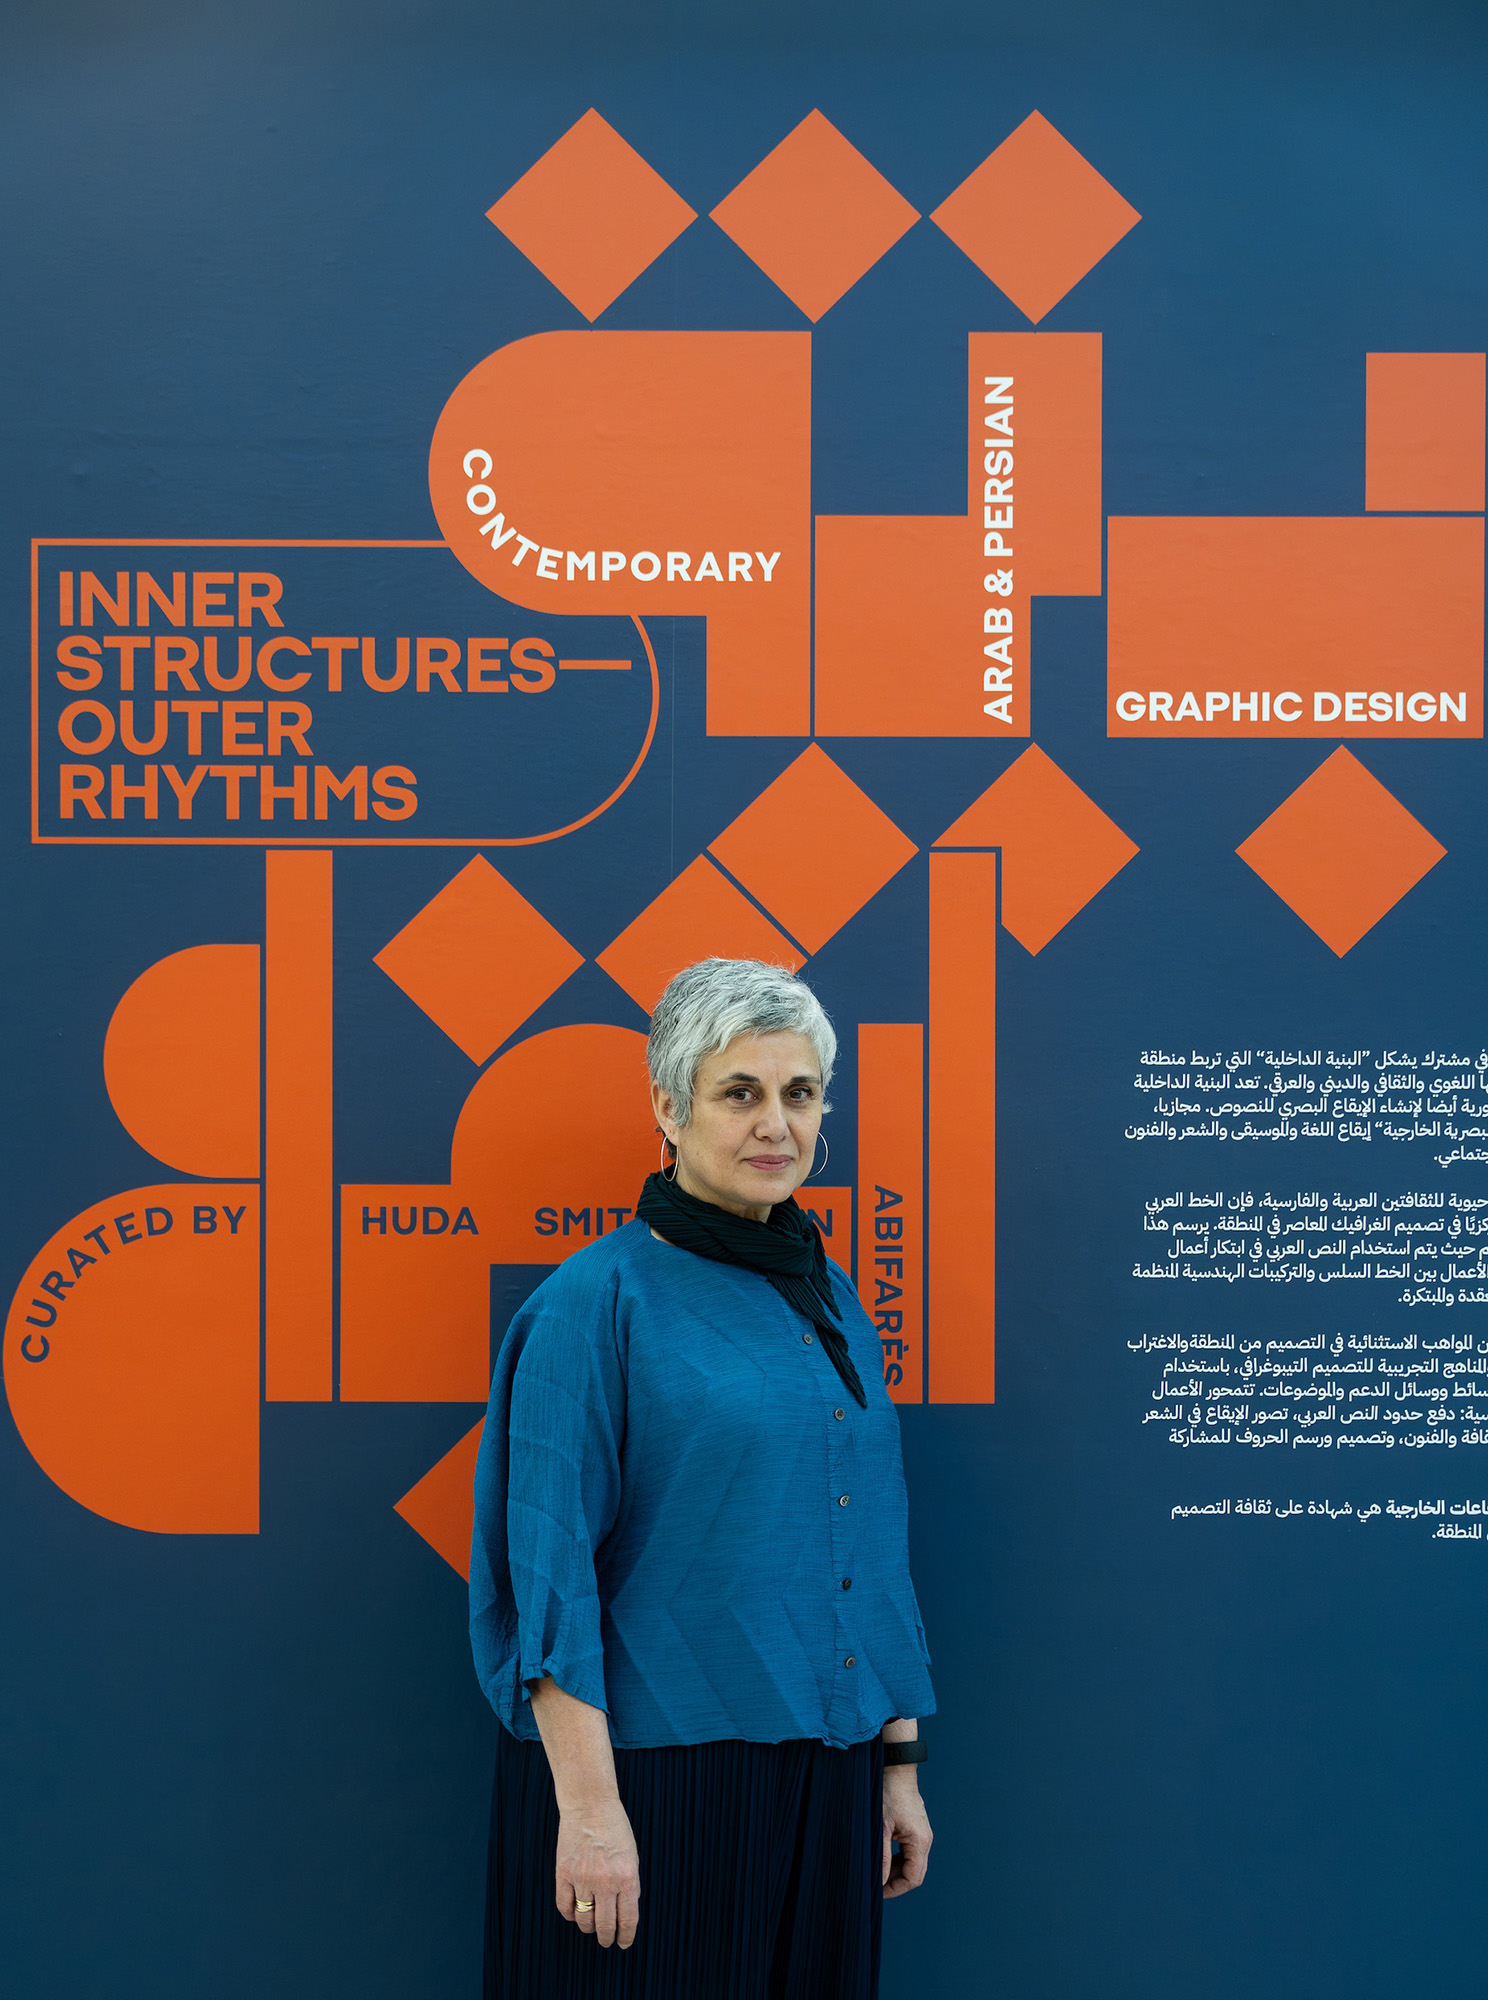 Huda standing in front of the gallery branding with the exhibition details on the wall behind her